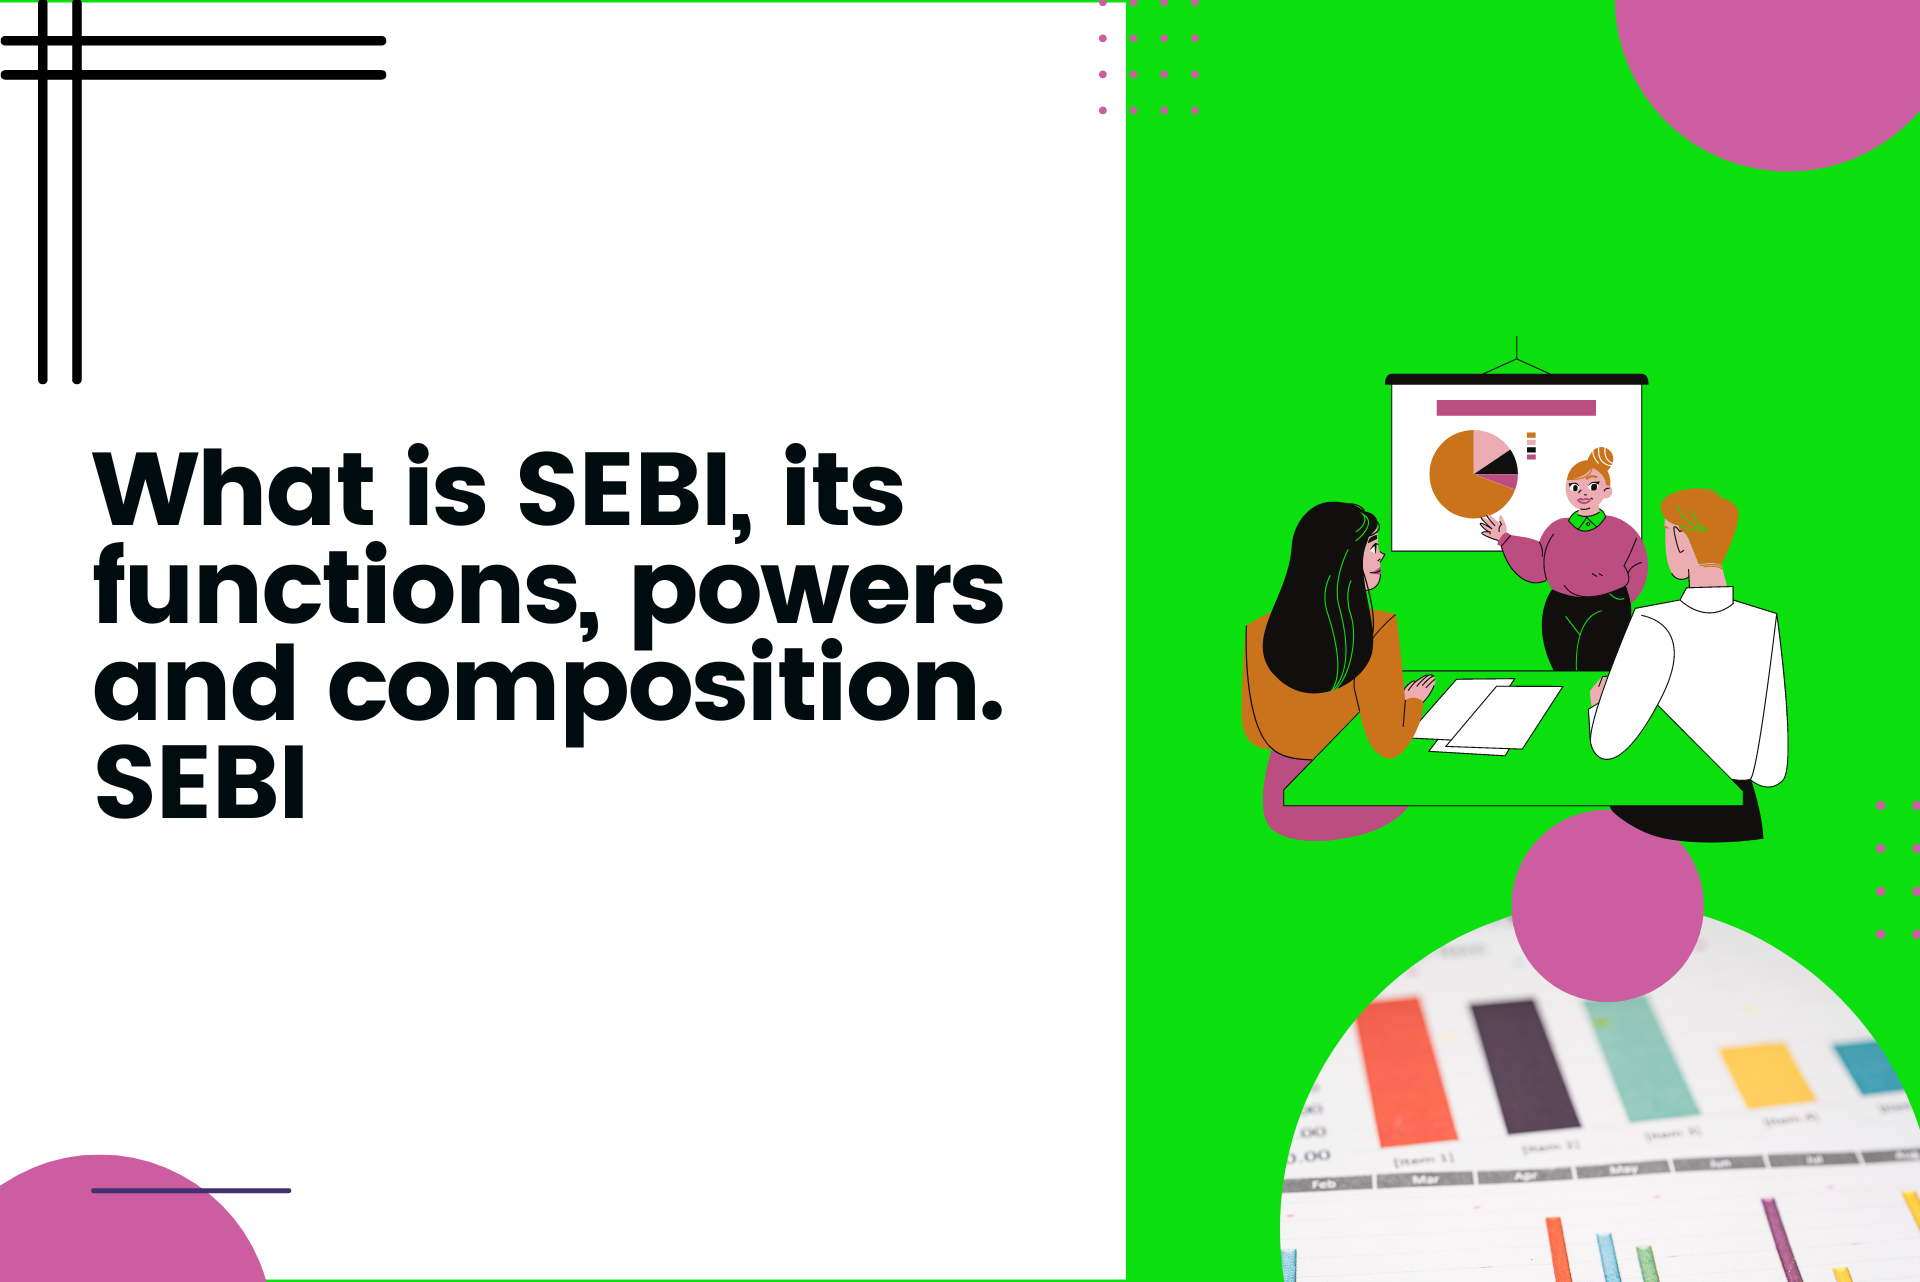 What is SEBI, its functions, powers and composition. SEBI